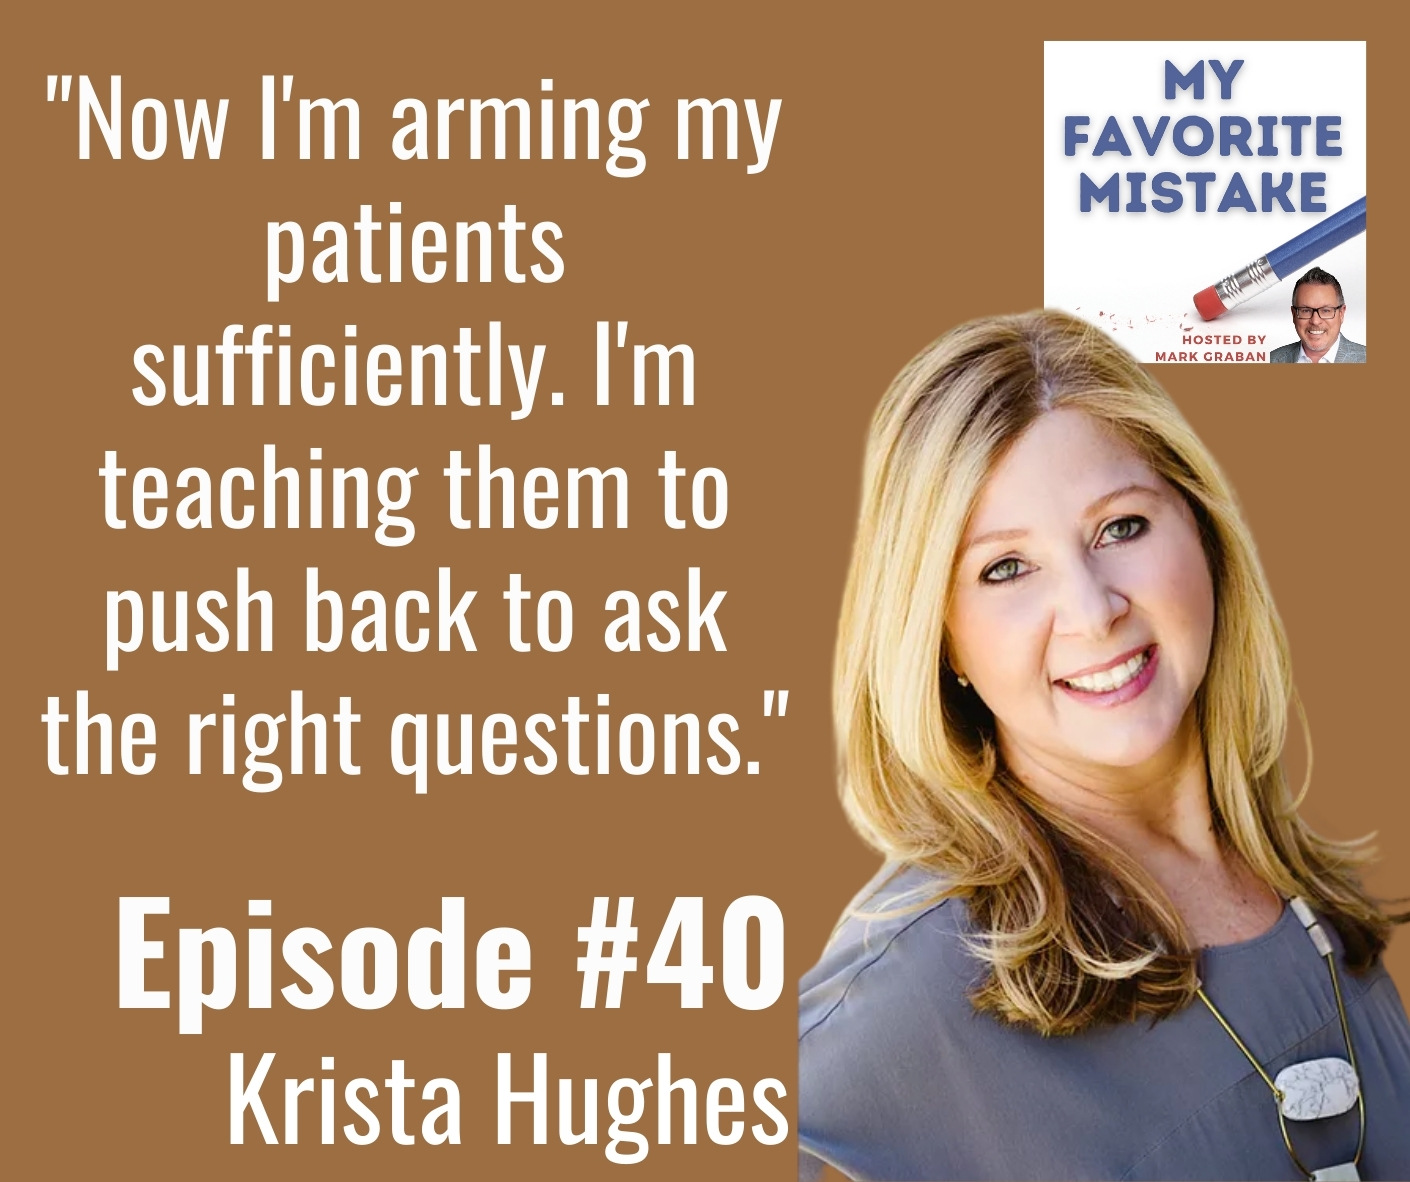 "Now I'm arming my patients sufficiently. I'm teaching them to push back to ask the right questions."